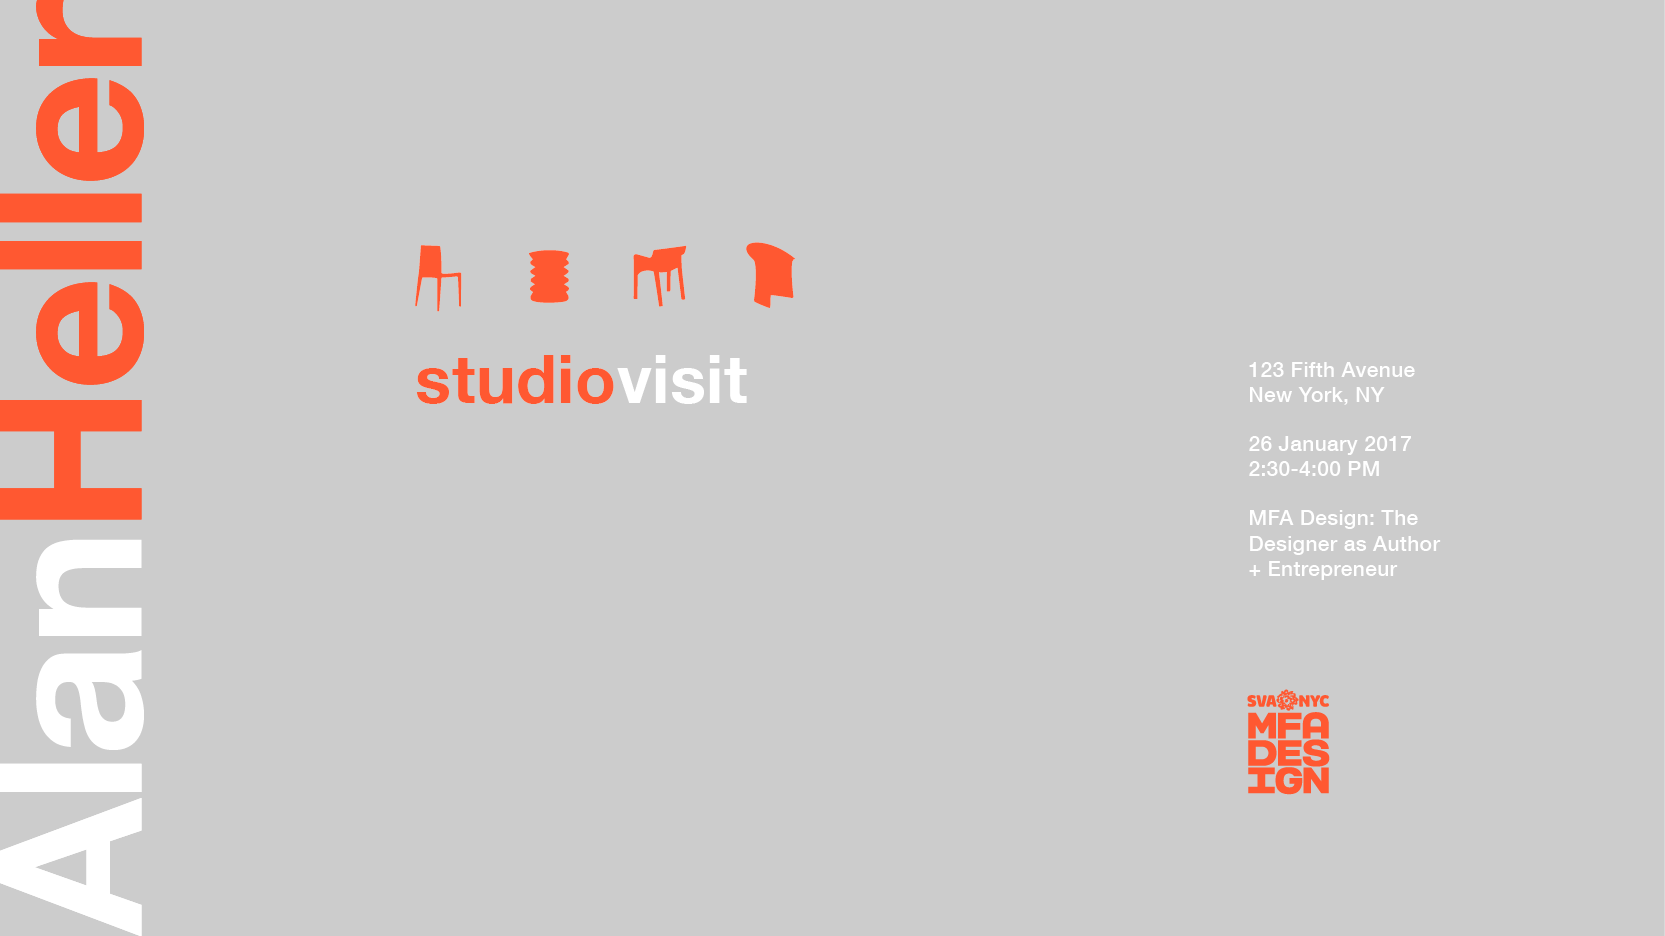 A gray poster with  some furniture pictograms and some orange and white text: Alan Heller studio visit. SVA NYC MFA Design logo.